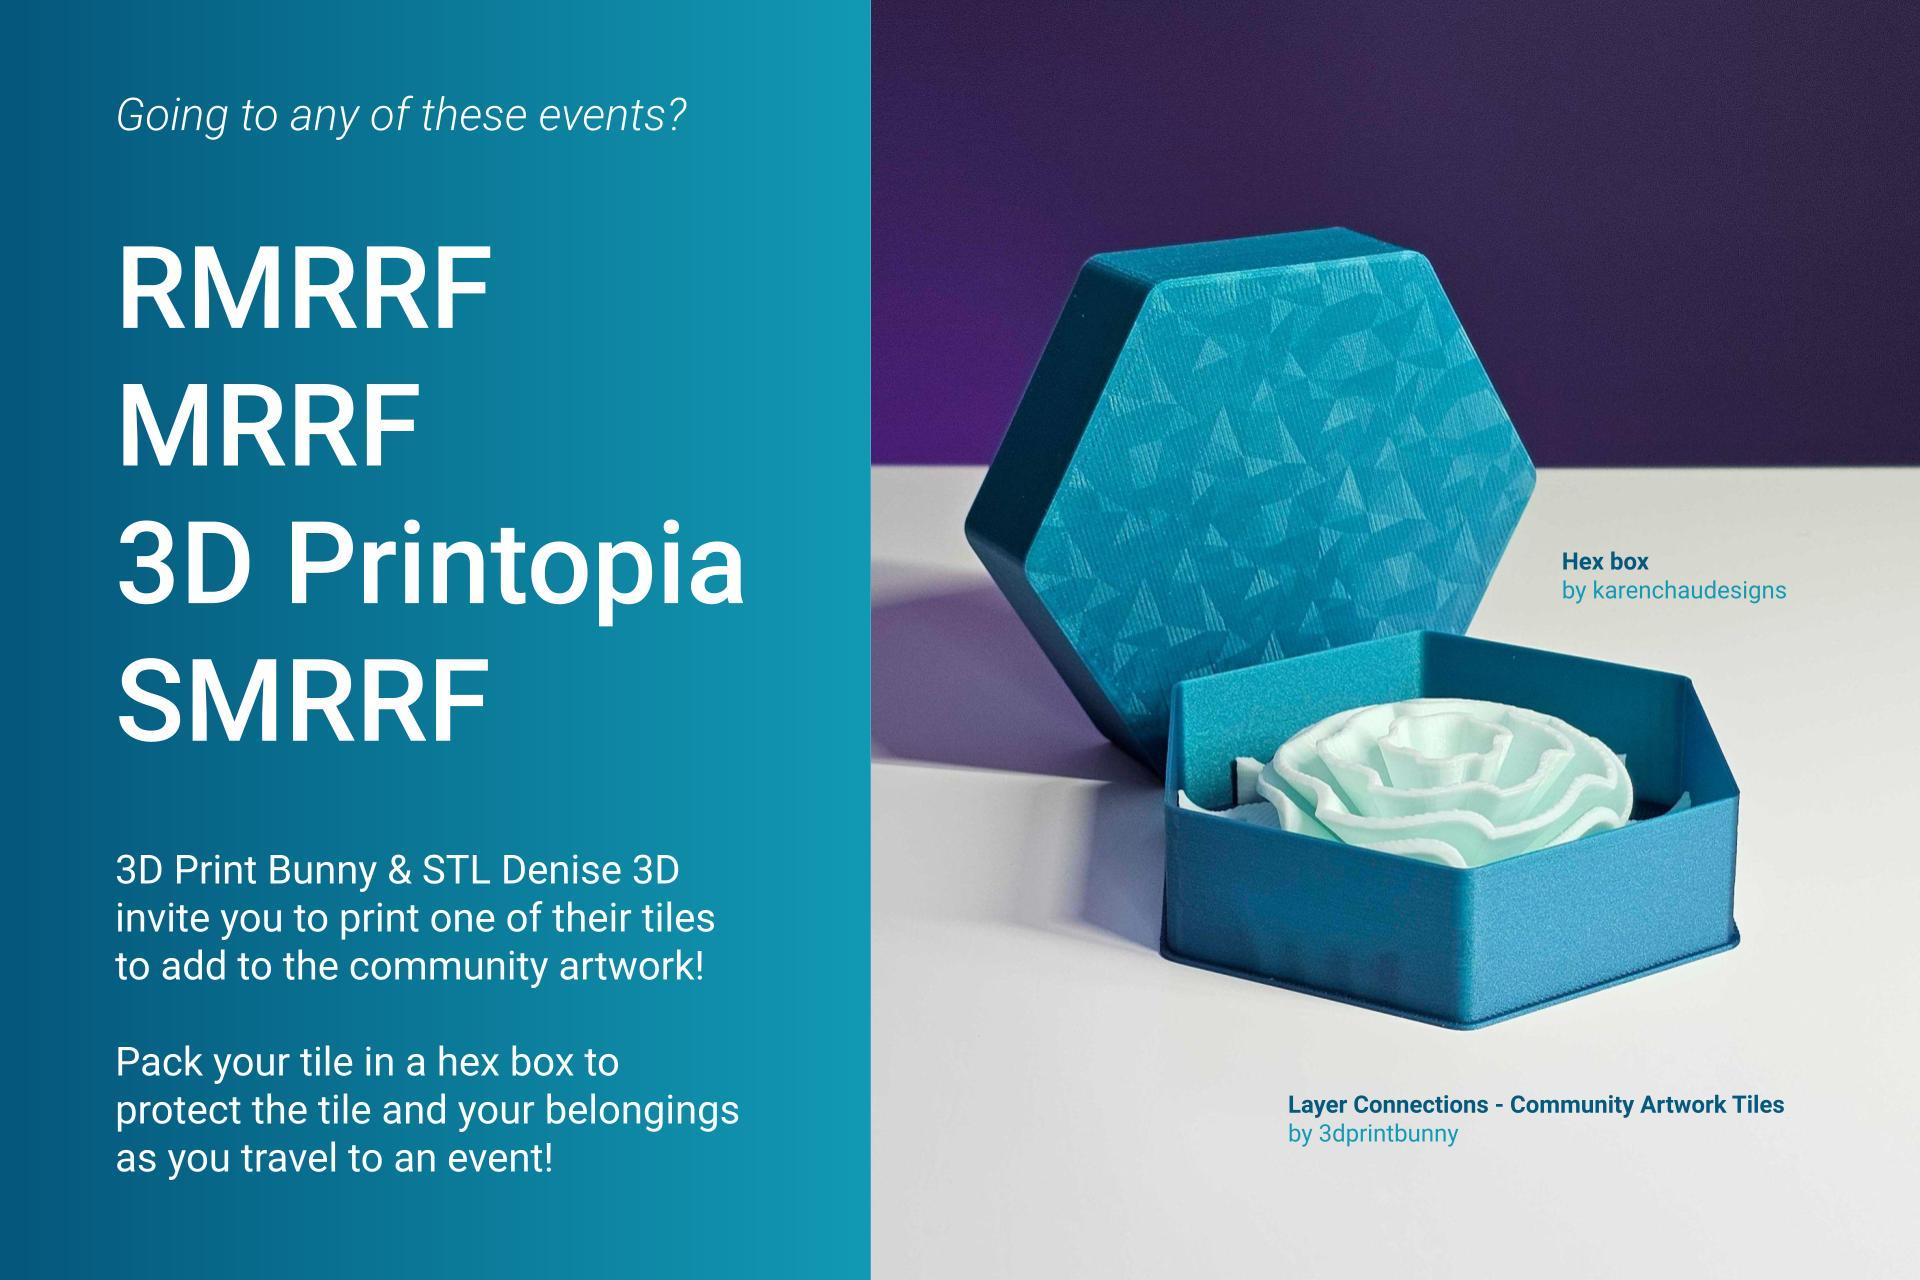 Going to RMRRF, MRRF, 3D Printopia, or SMRRF?